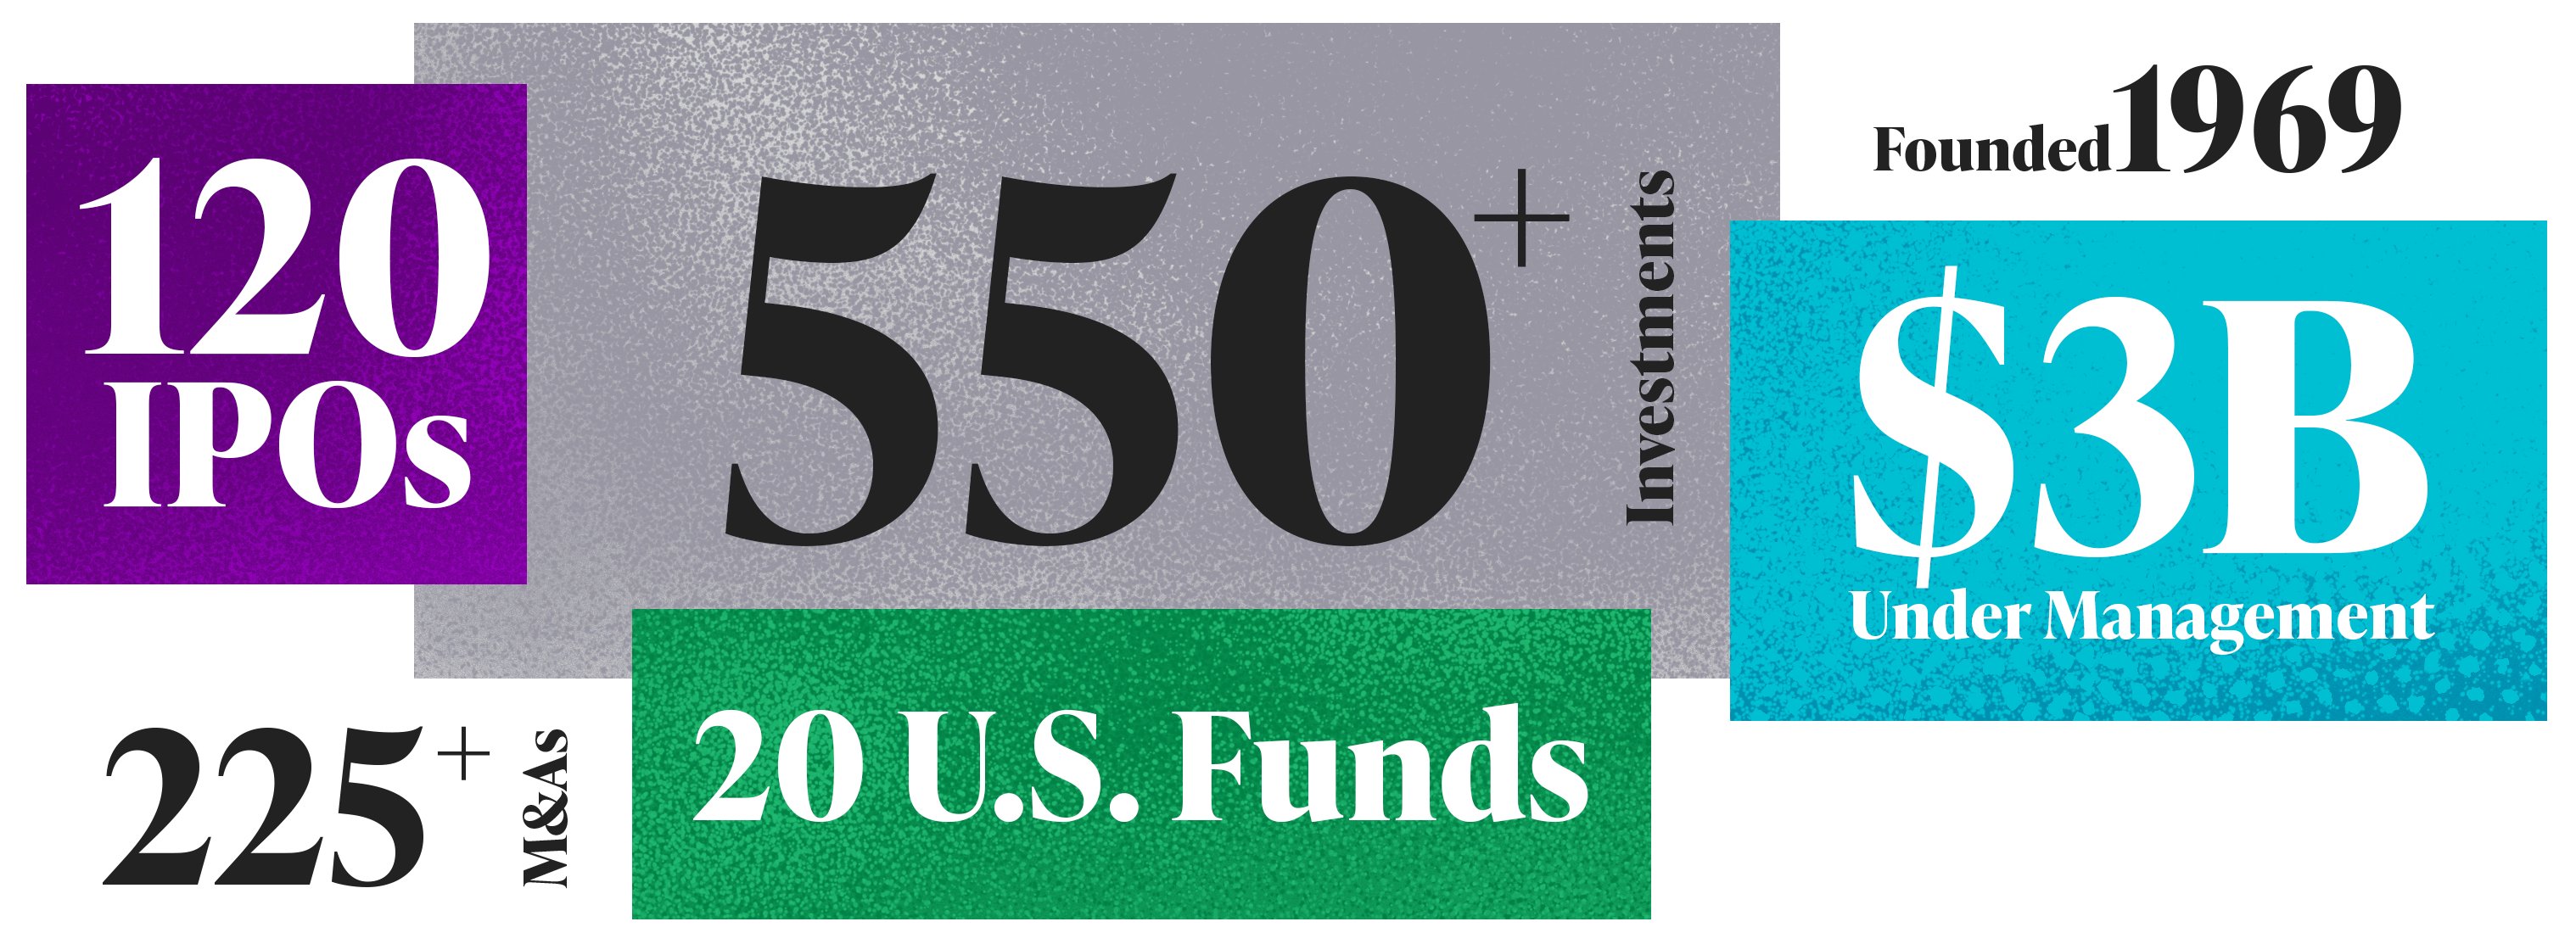 120 IPOs, 550 Investments, 225 M+As, 20 U.S. Funds, $3B Under Management, Founded 1969